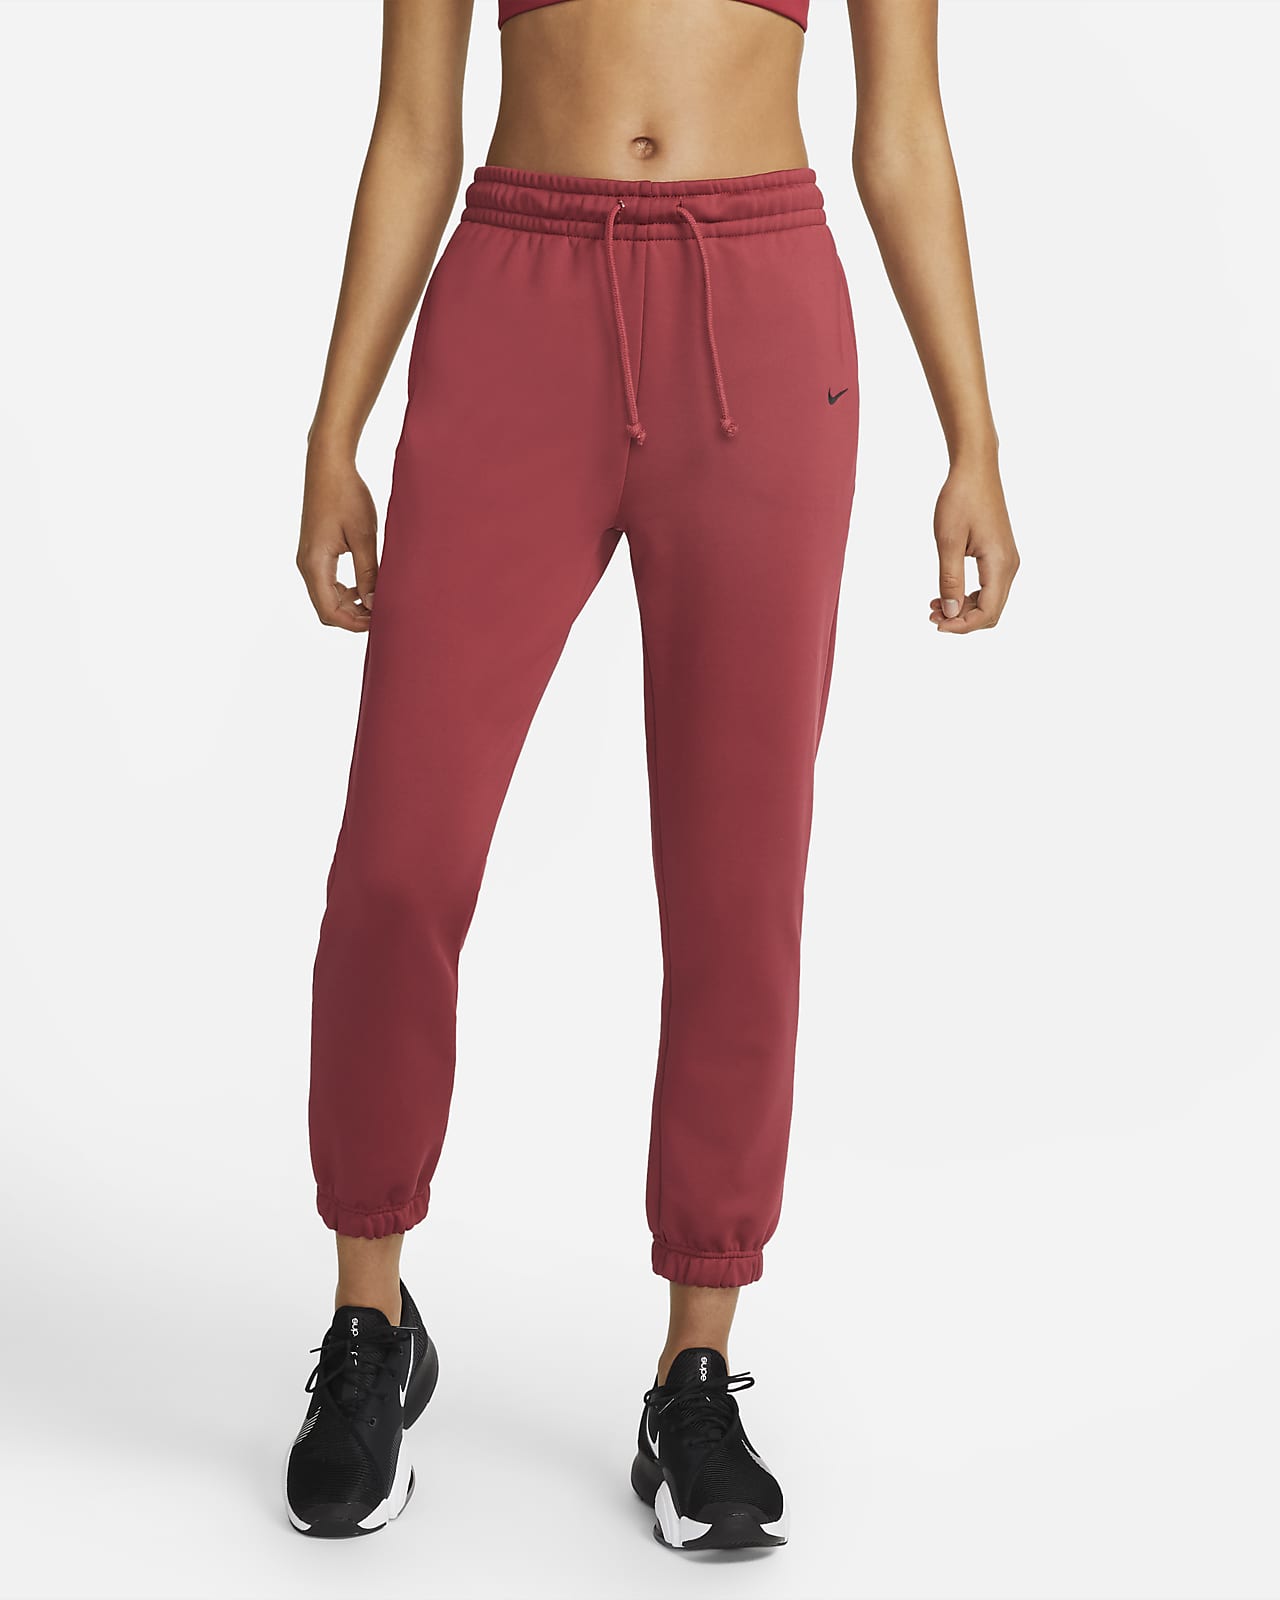 Nike Therma-FIT All Time Women's Training Trousers